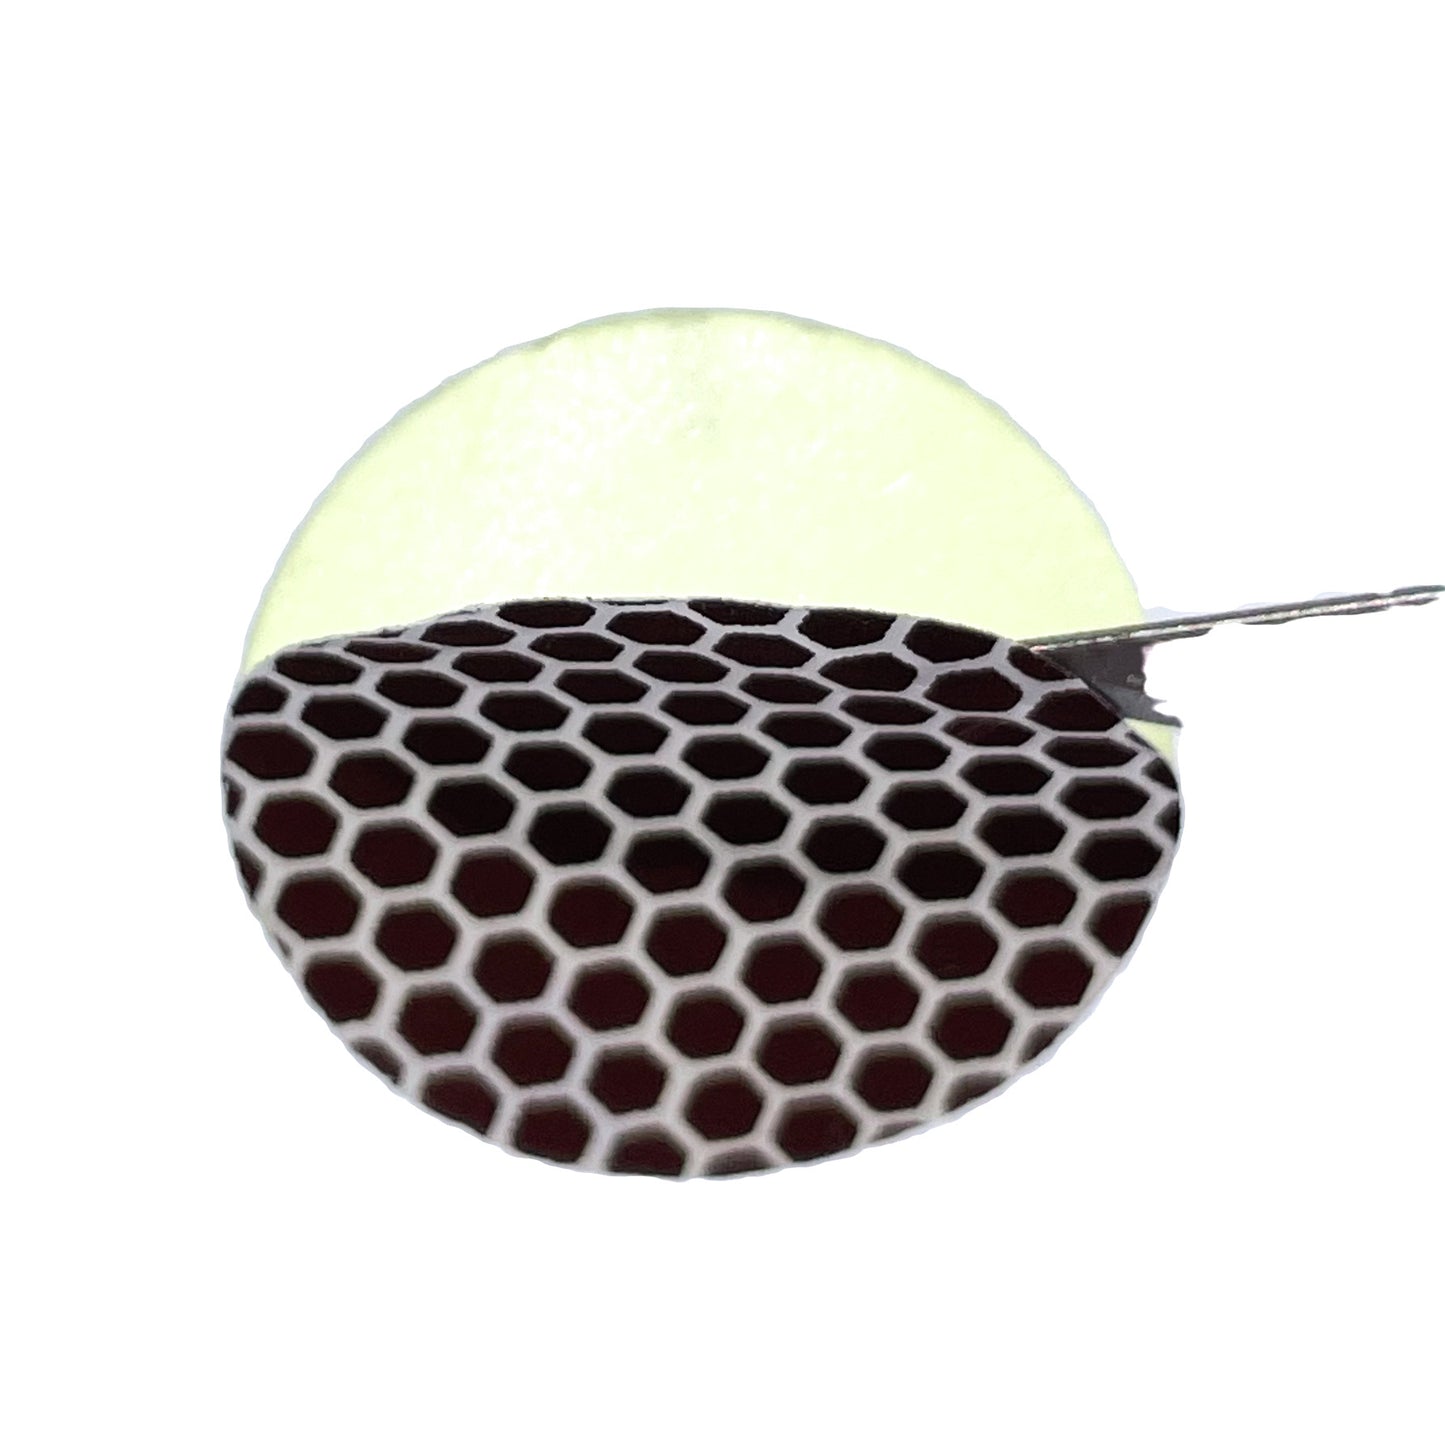 Replacement Match Striker Dots (Pack of 12)